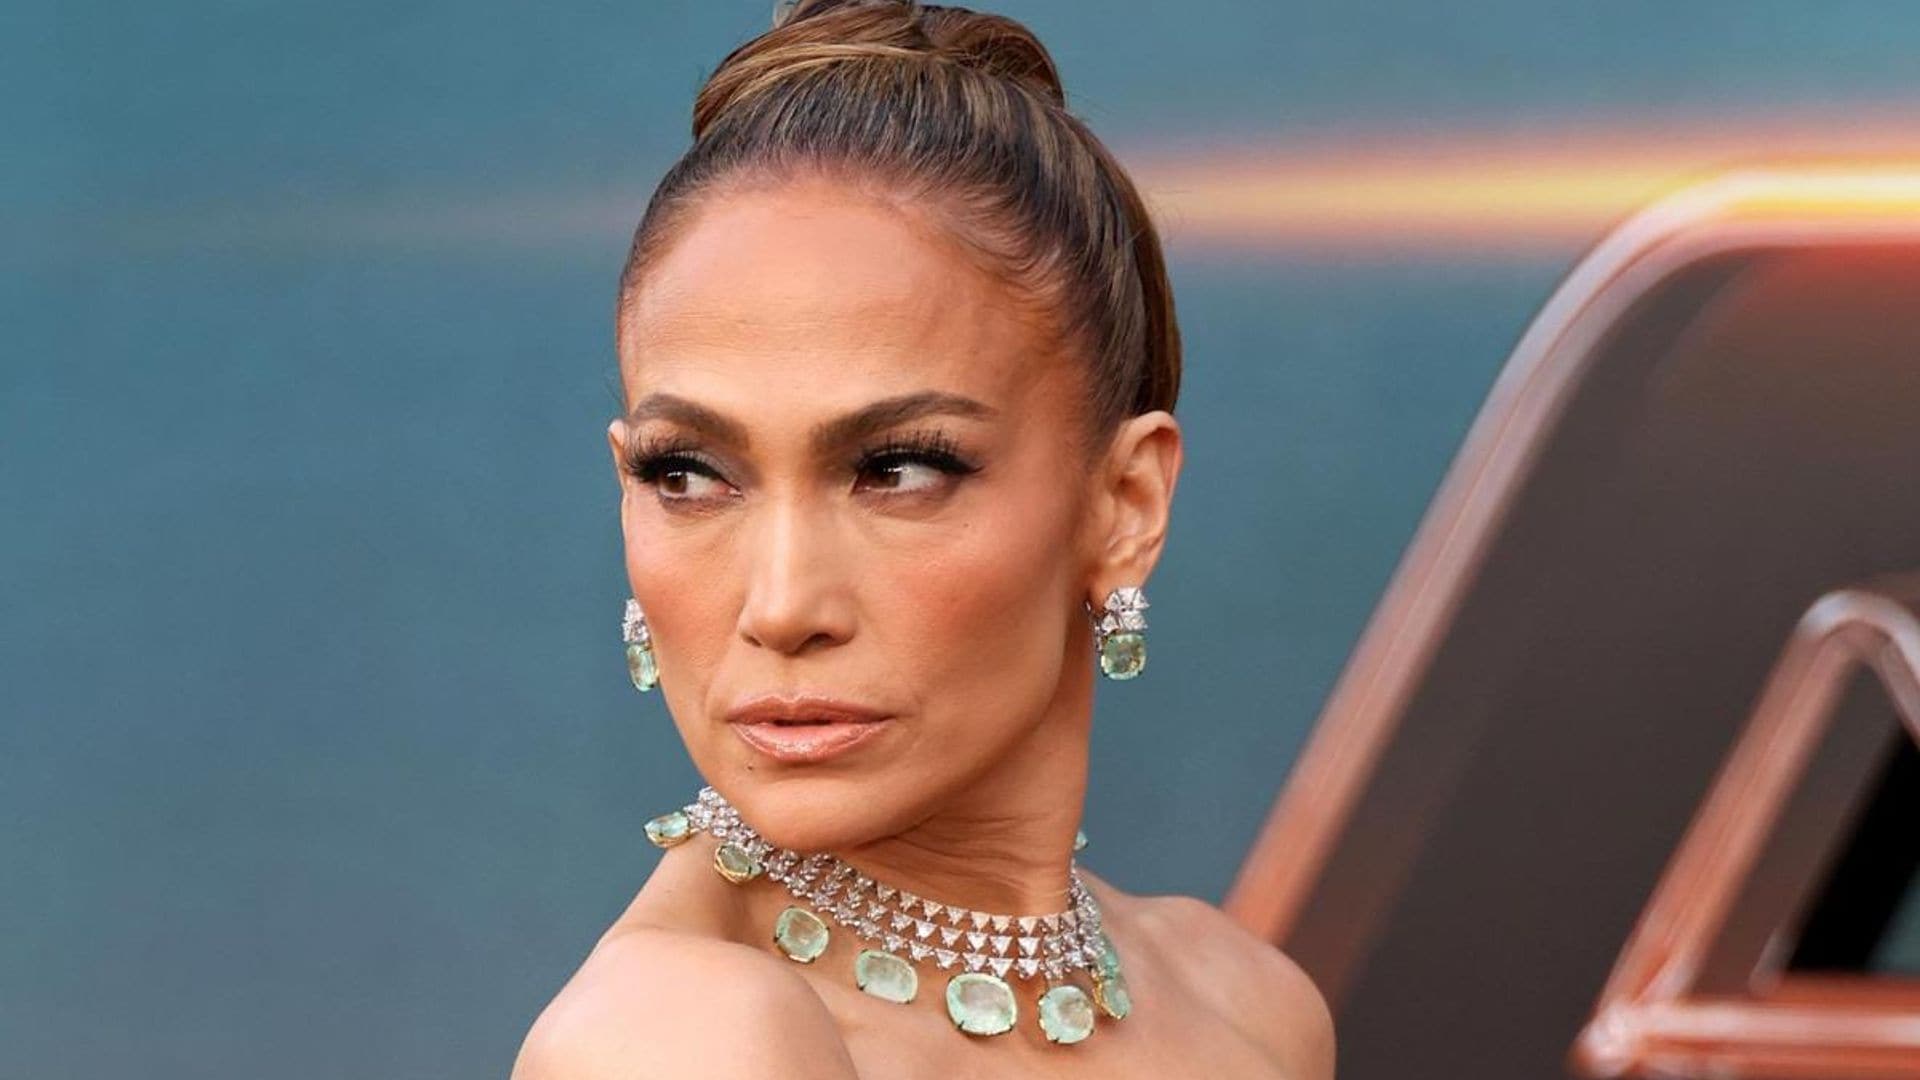 Jennifer Lopez’s chic hairstyles while promoting ‘Atlas’